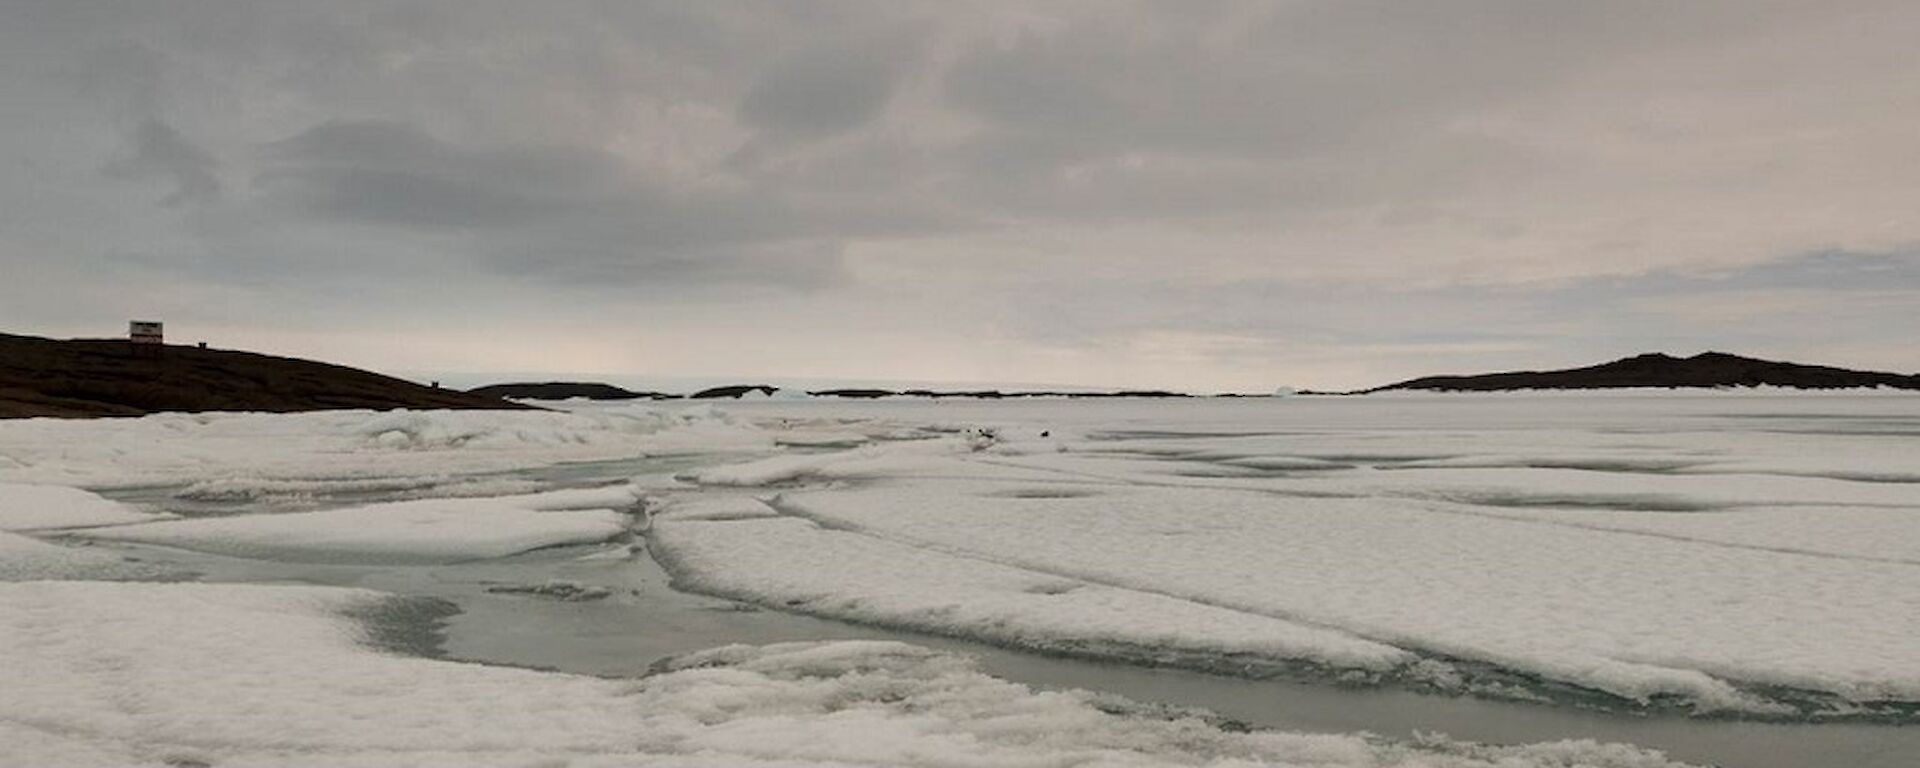 Changes in the sea ice are becoming obvious with cracks and leads opening up.